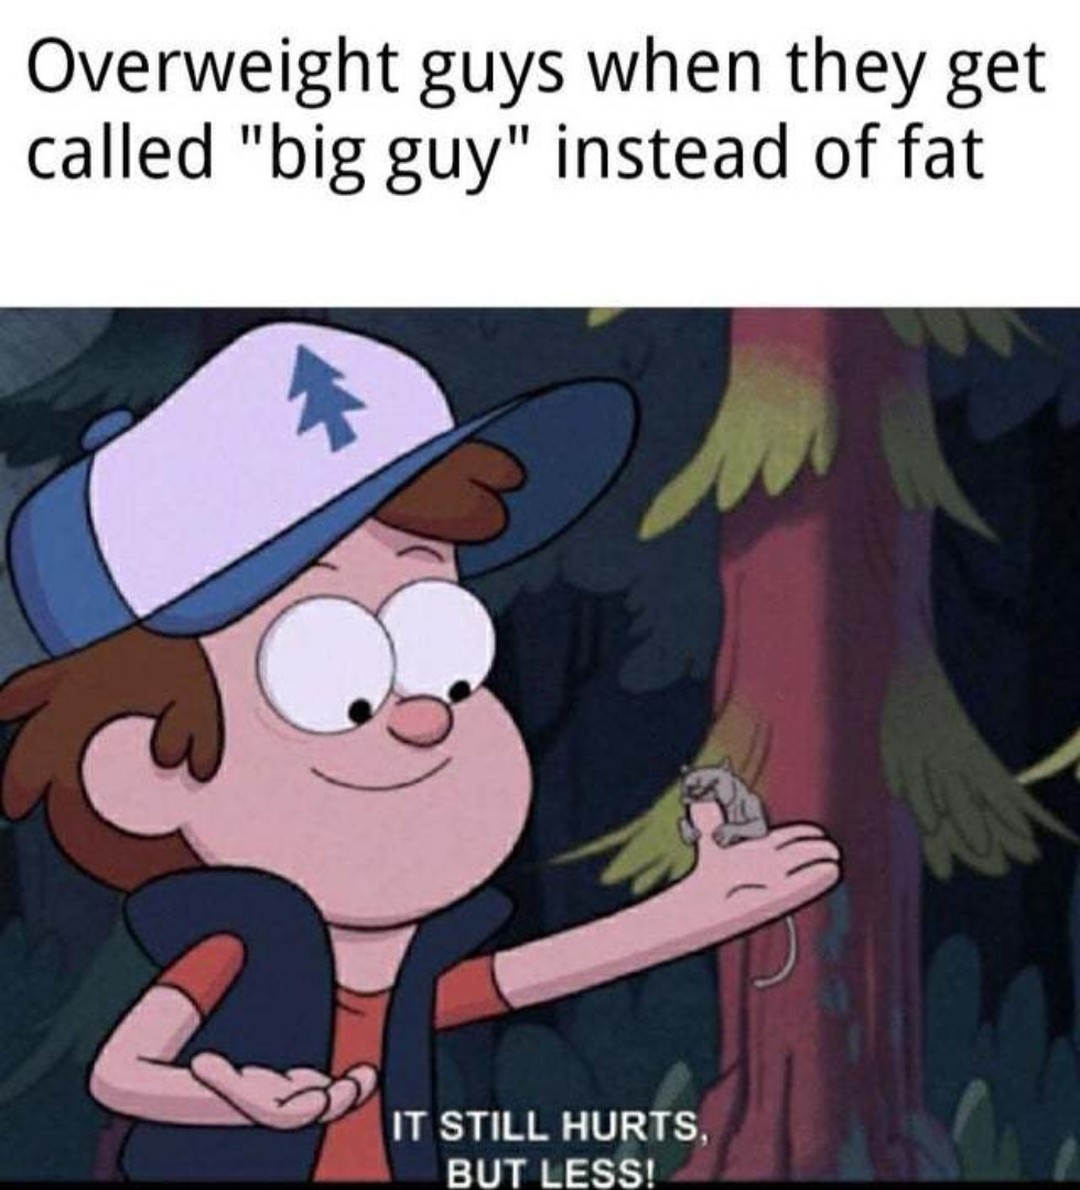 Overweight guys when they get called "big guy" instead of fat.  It still hurts, but less!